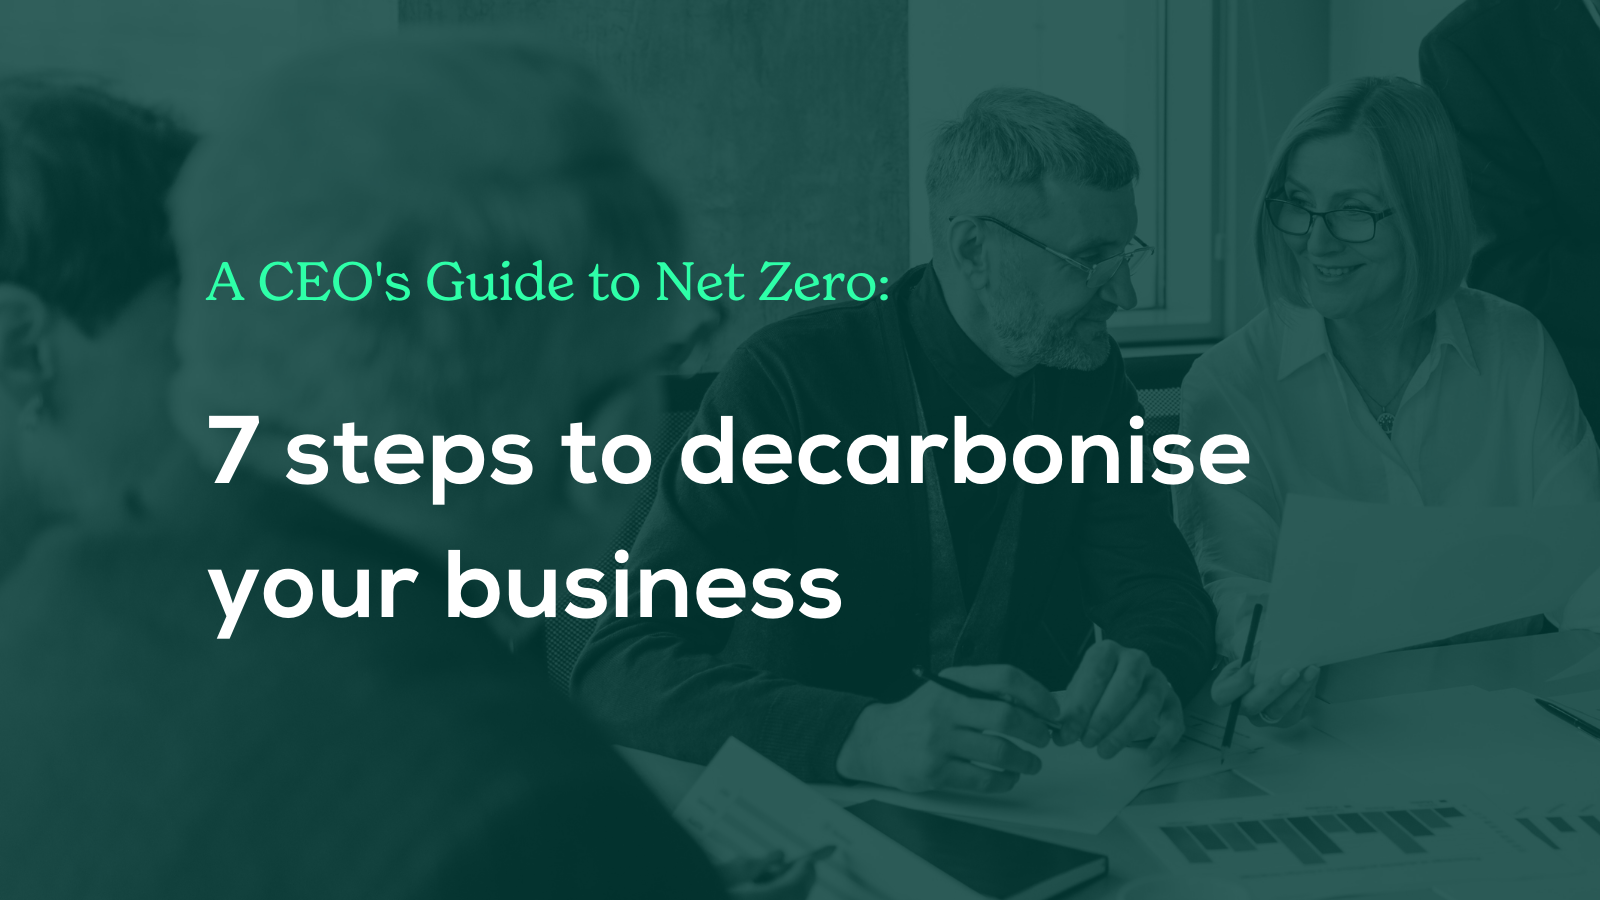 A CEO’s Guide to Net Zero: 7 steps to decarbonise your business